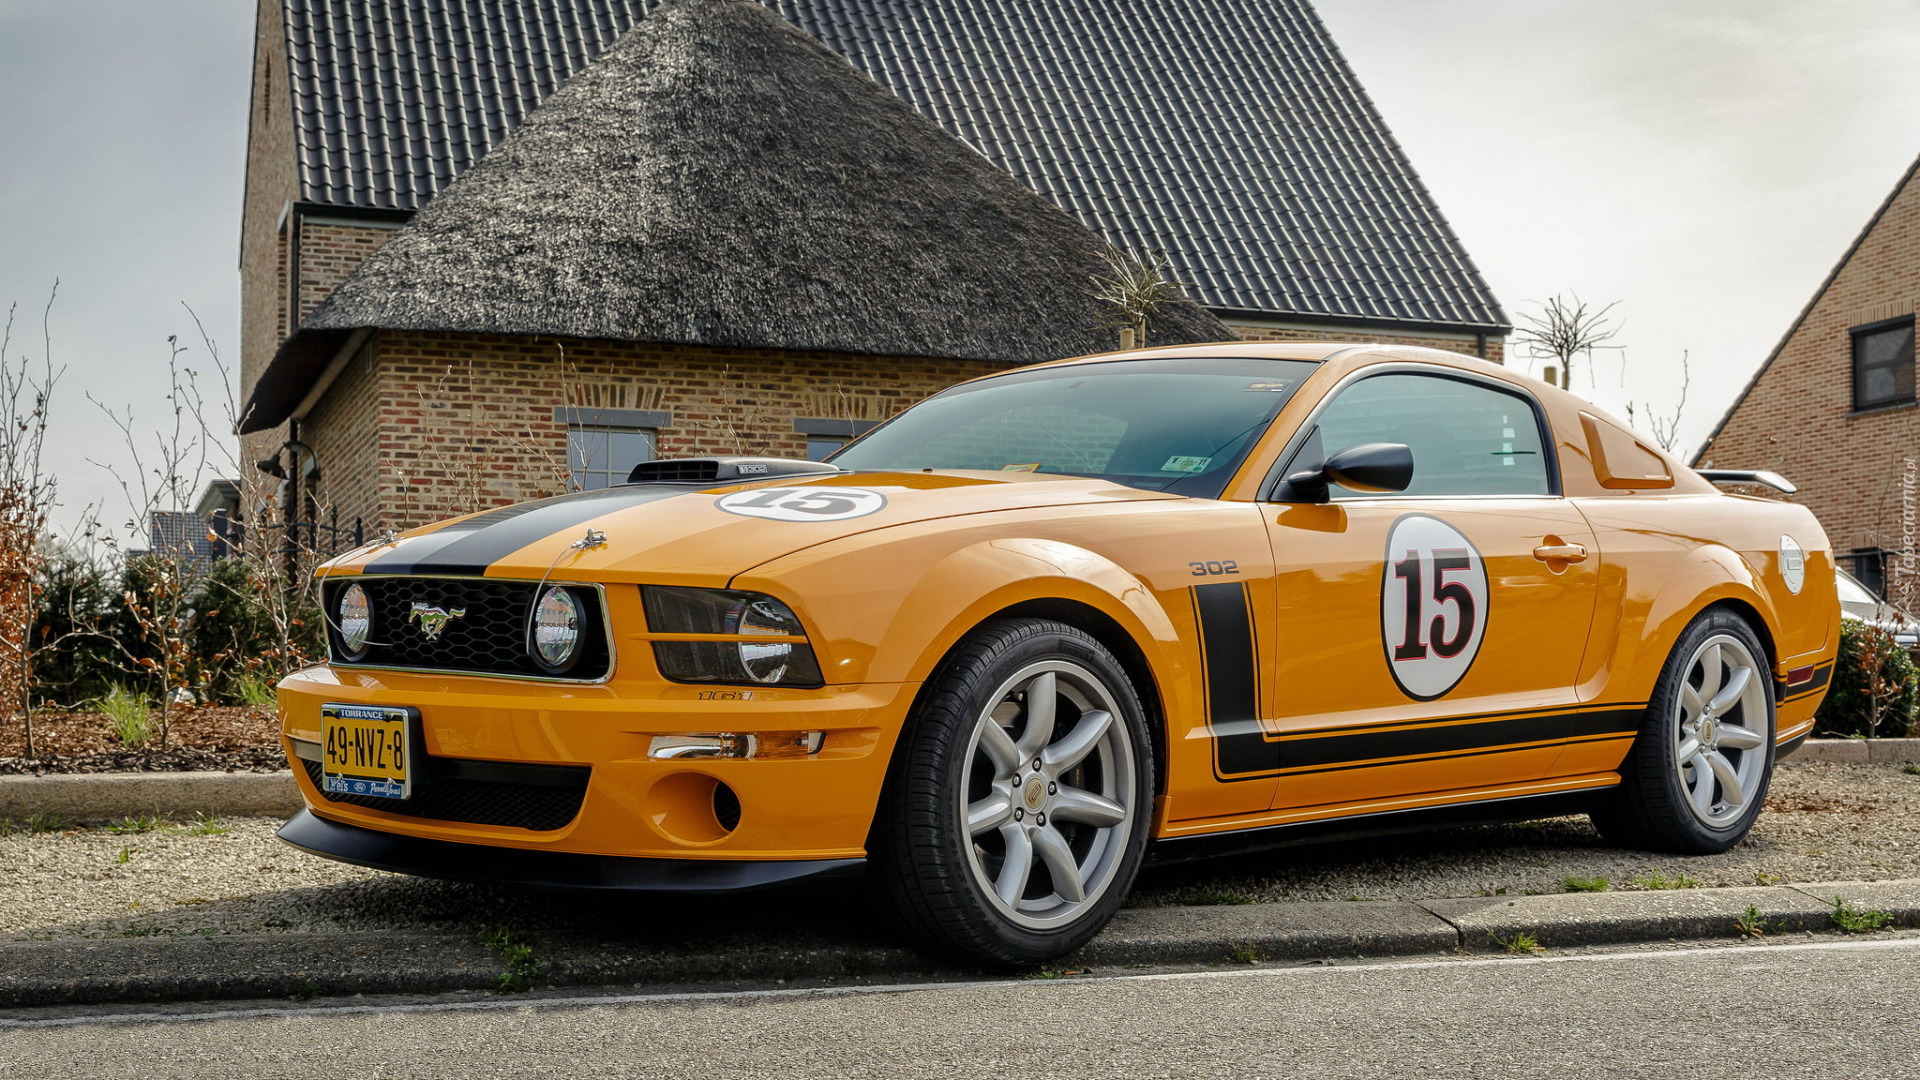 Ford Mustang 302, Saleen